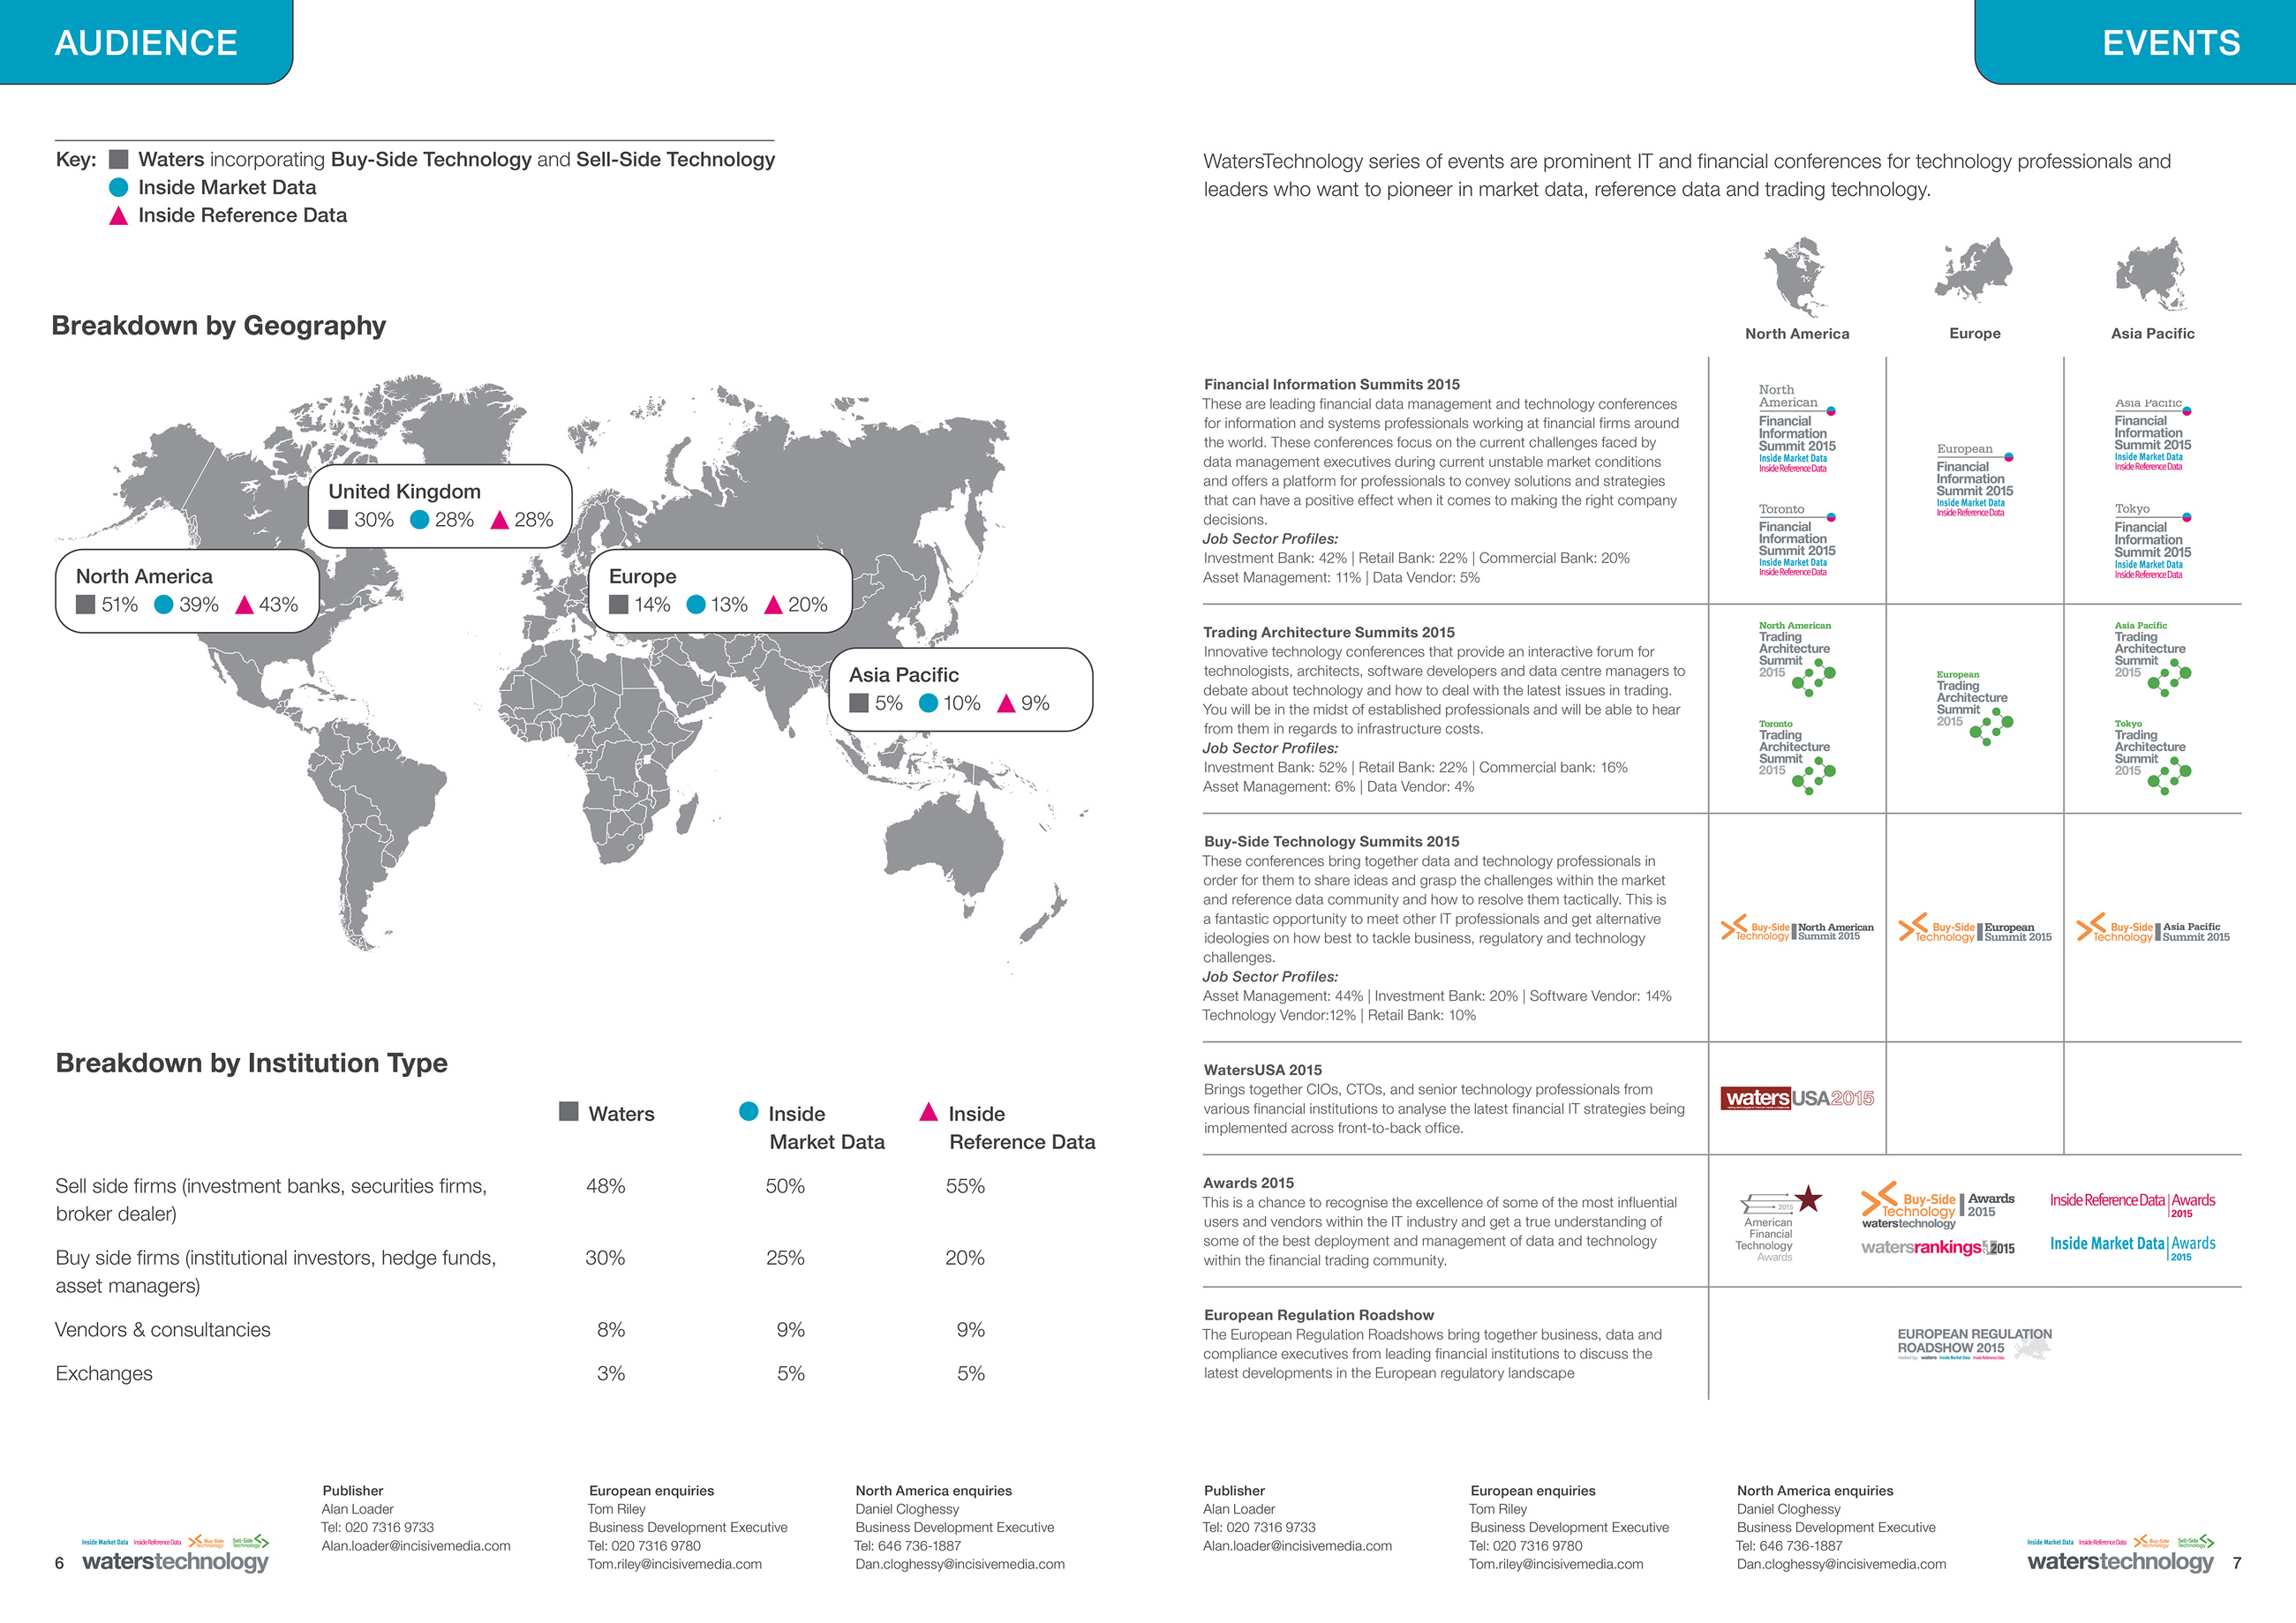 Inside spread of brochure for Waters Technology. On the left-hand page, data on Waters' audience superimposes a world map. The data is broken down by region: North America, the United Kingdom, continental Europe, and the Asia-Pacific region. Below the map, a table classifies audience by institution type. On the right-hand page, a table lists Waters' events in North America, Europe, and the Asia-Pacific region, with descriptions and event logos.